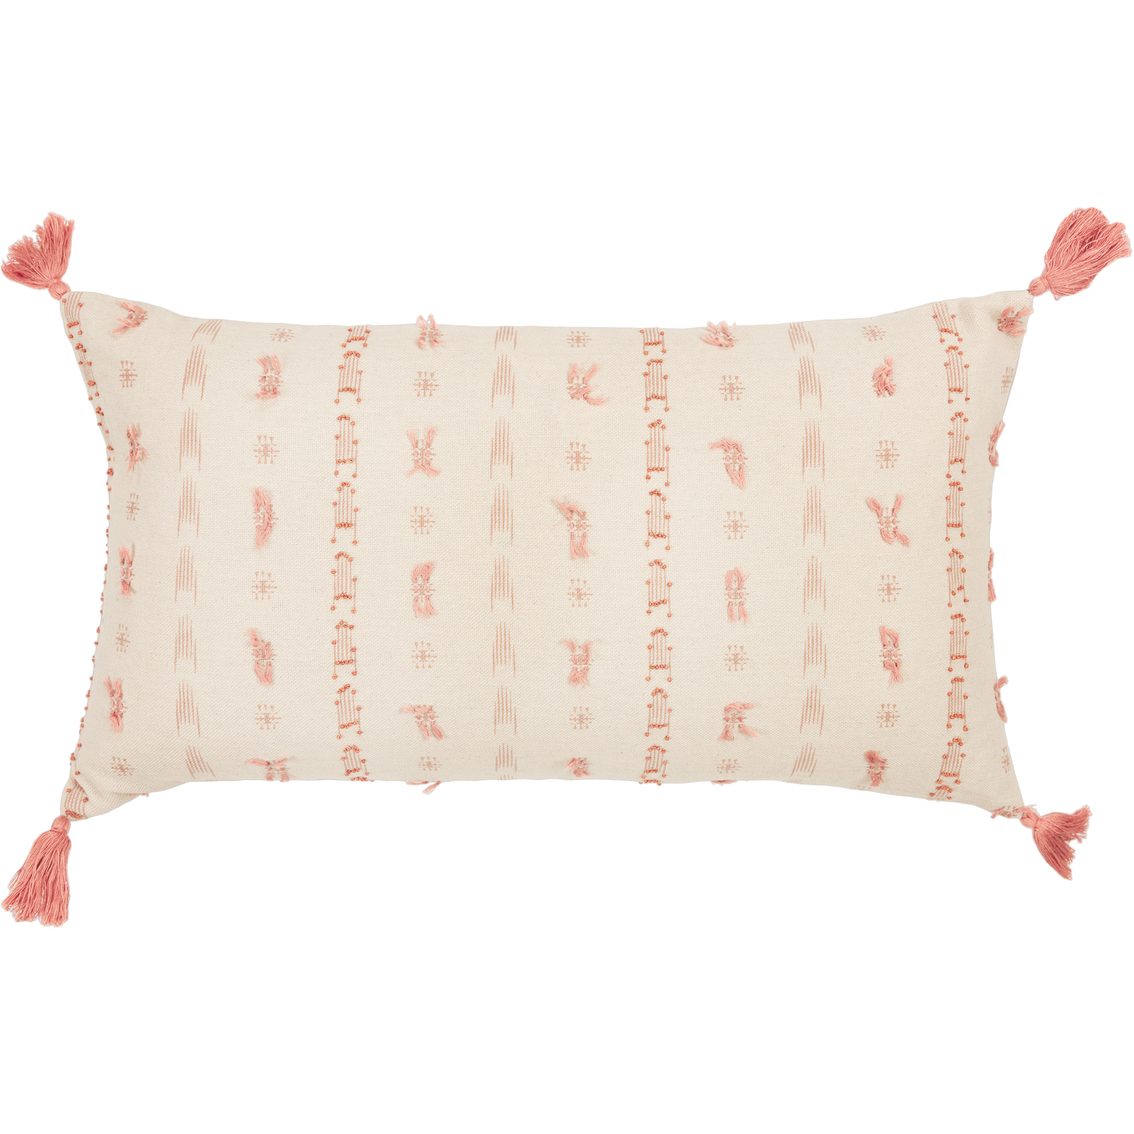 Rizzy Home Geometric Blush Polyester Filled Pillow